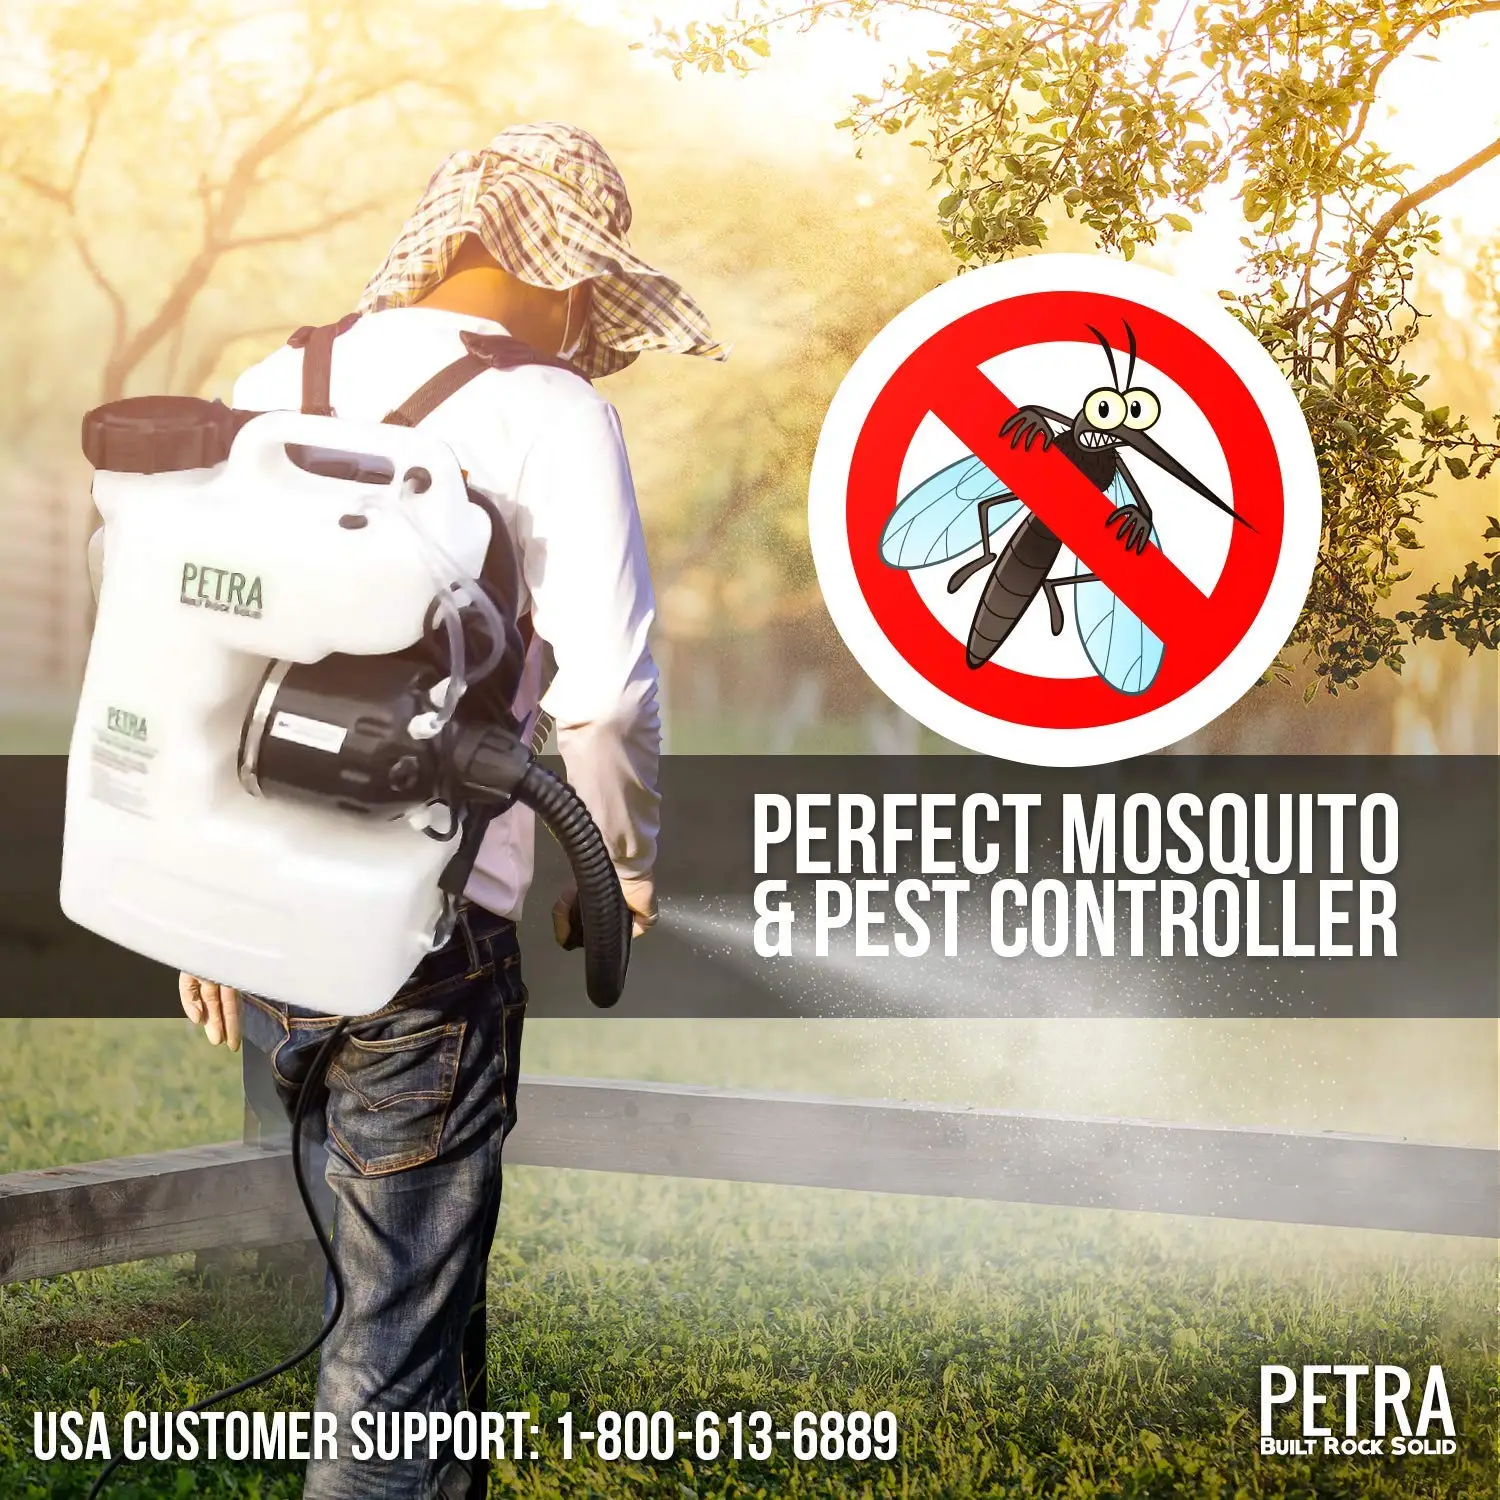 Buy B&G Pest Pro IV Backpack Sprayer with Fan Tip in Cheap Price on 0